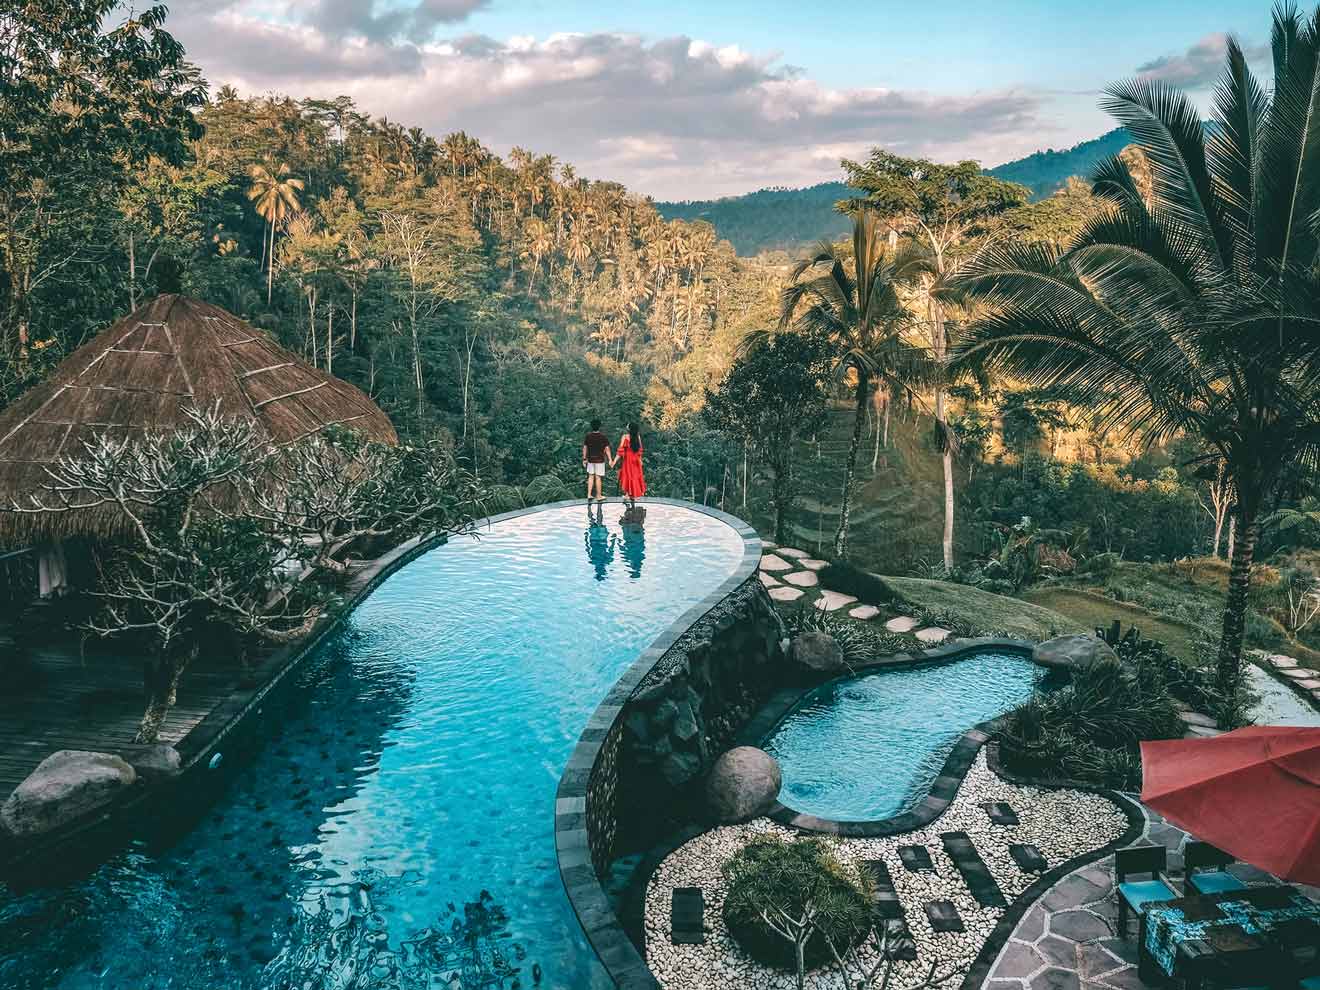 Two people standing on the edge of a pool in the jungle.